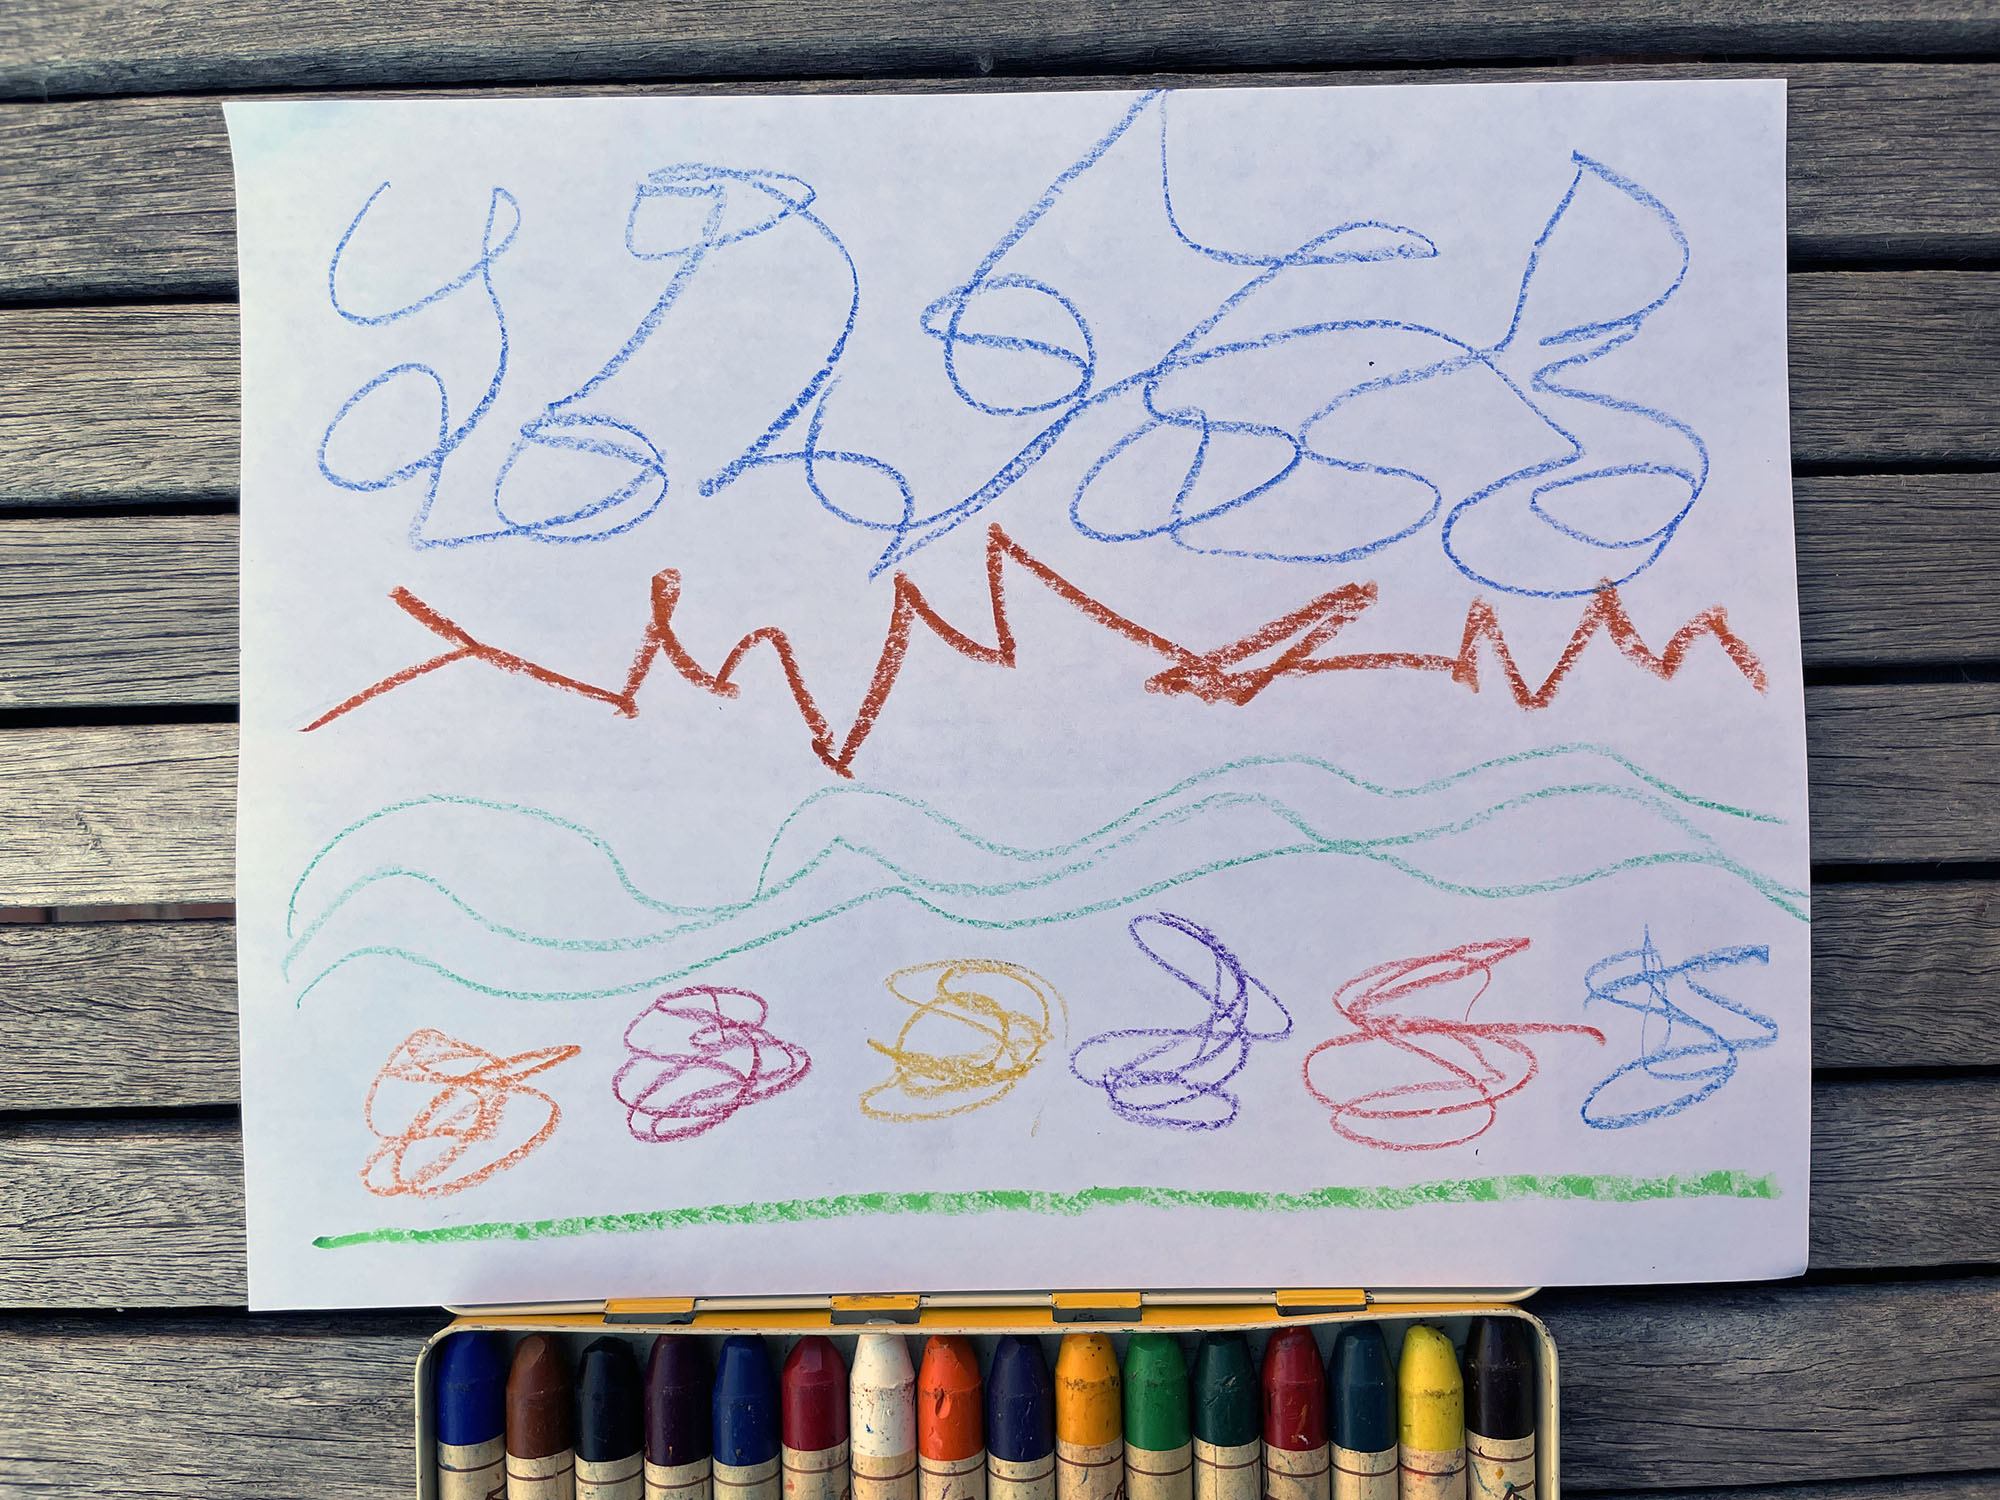 a crayon drawing show movement with squiggly lines